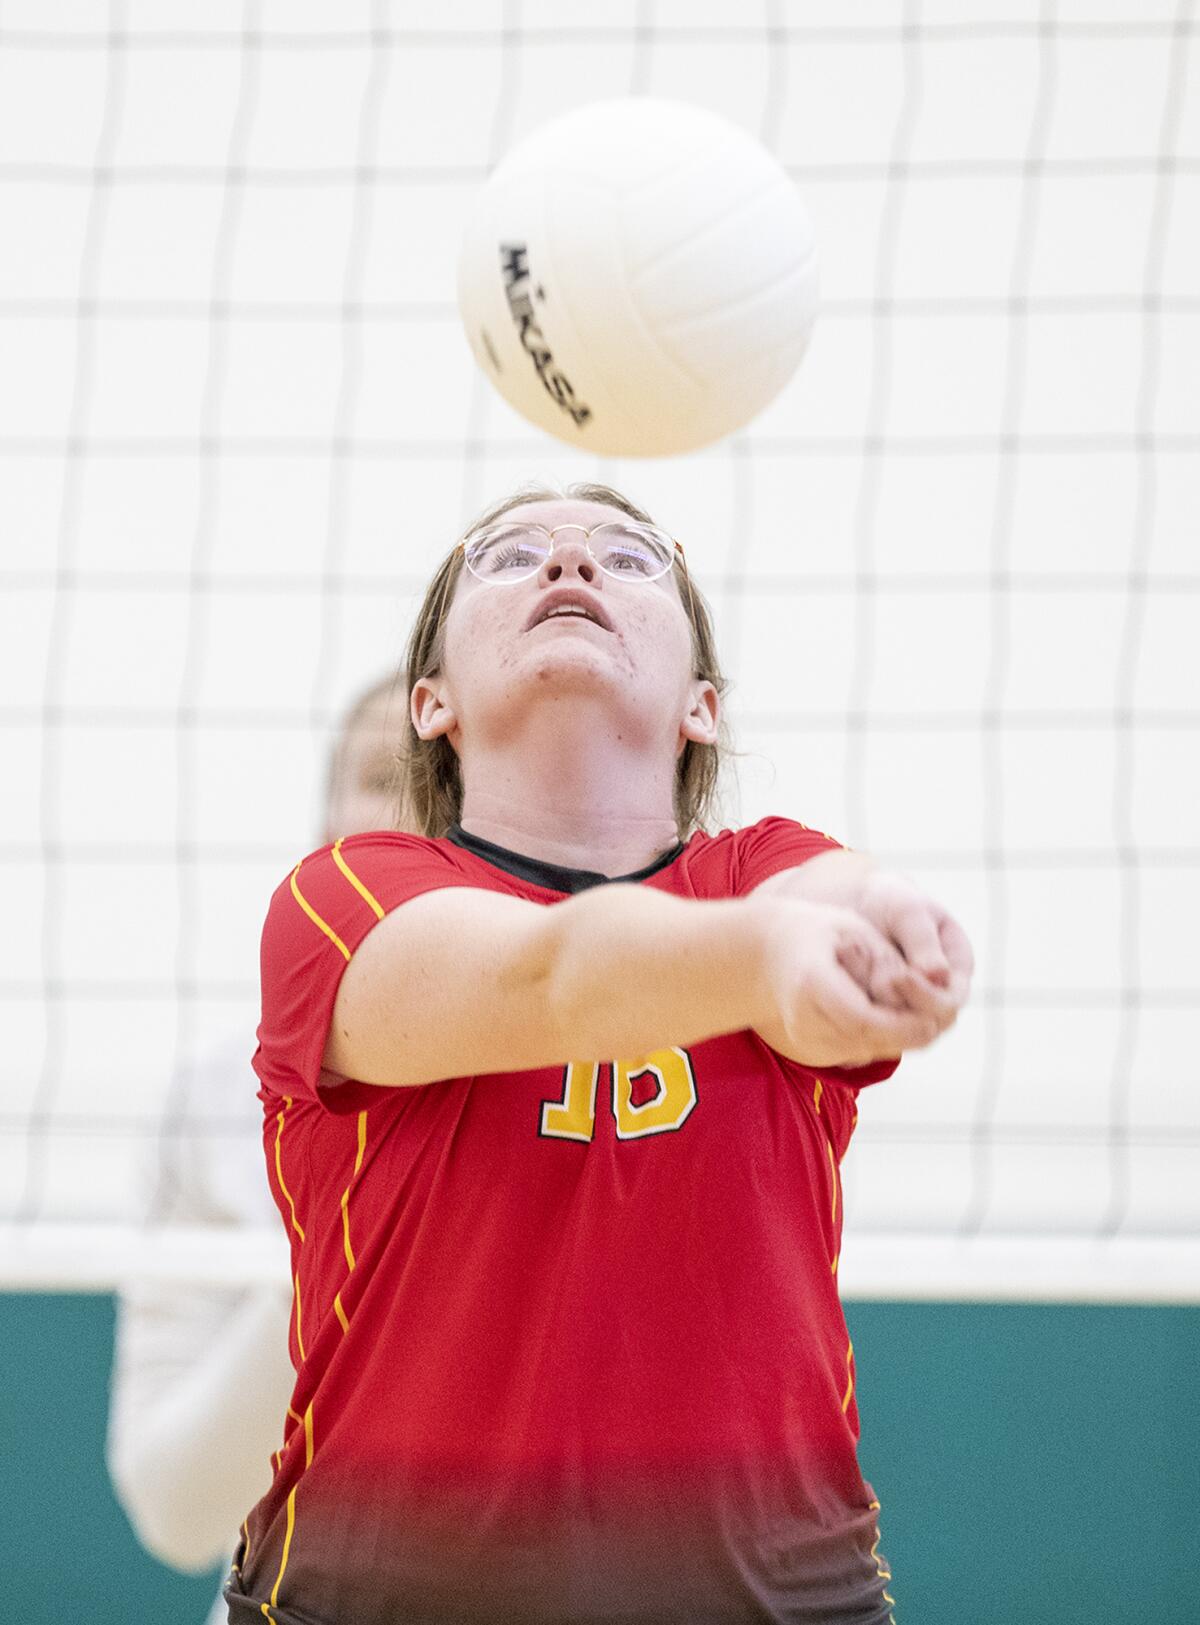 Estancia's Mailee Blanchard passes a ball against Costa Mesa on Tuesday.